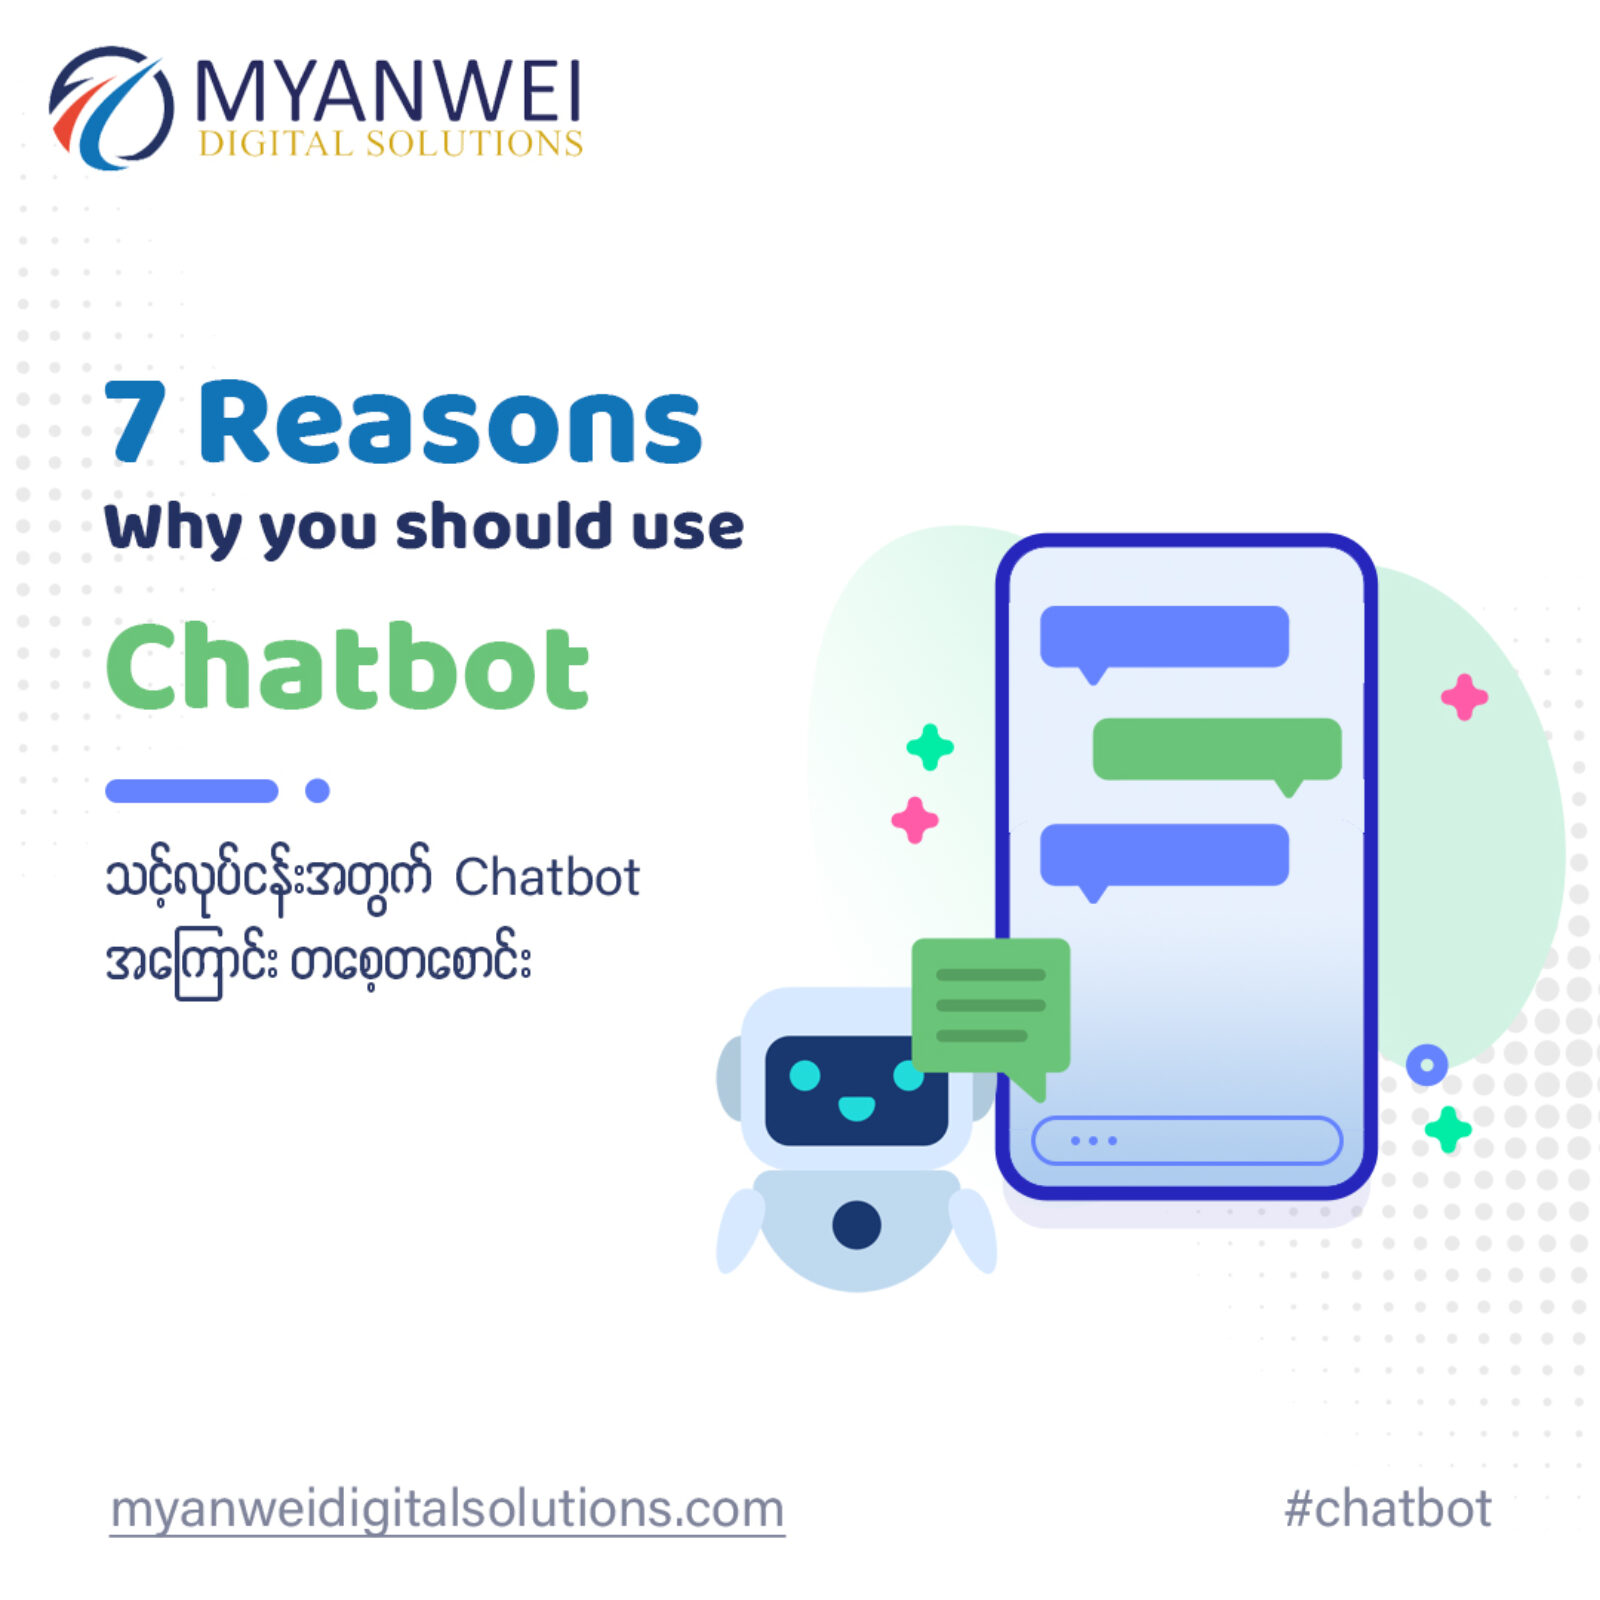 7 reason why you should use chat bot cover photo, Myanwei Digital Solutions, Digital Marketing Agency in Yangon